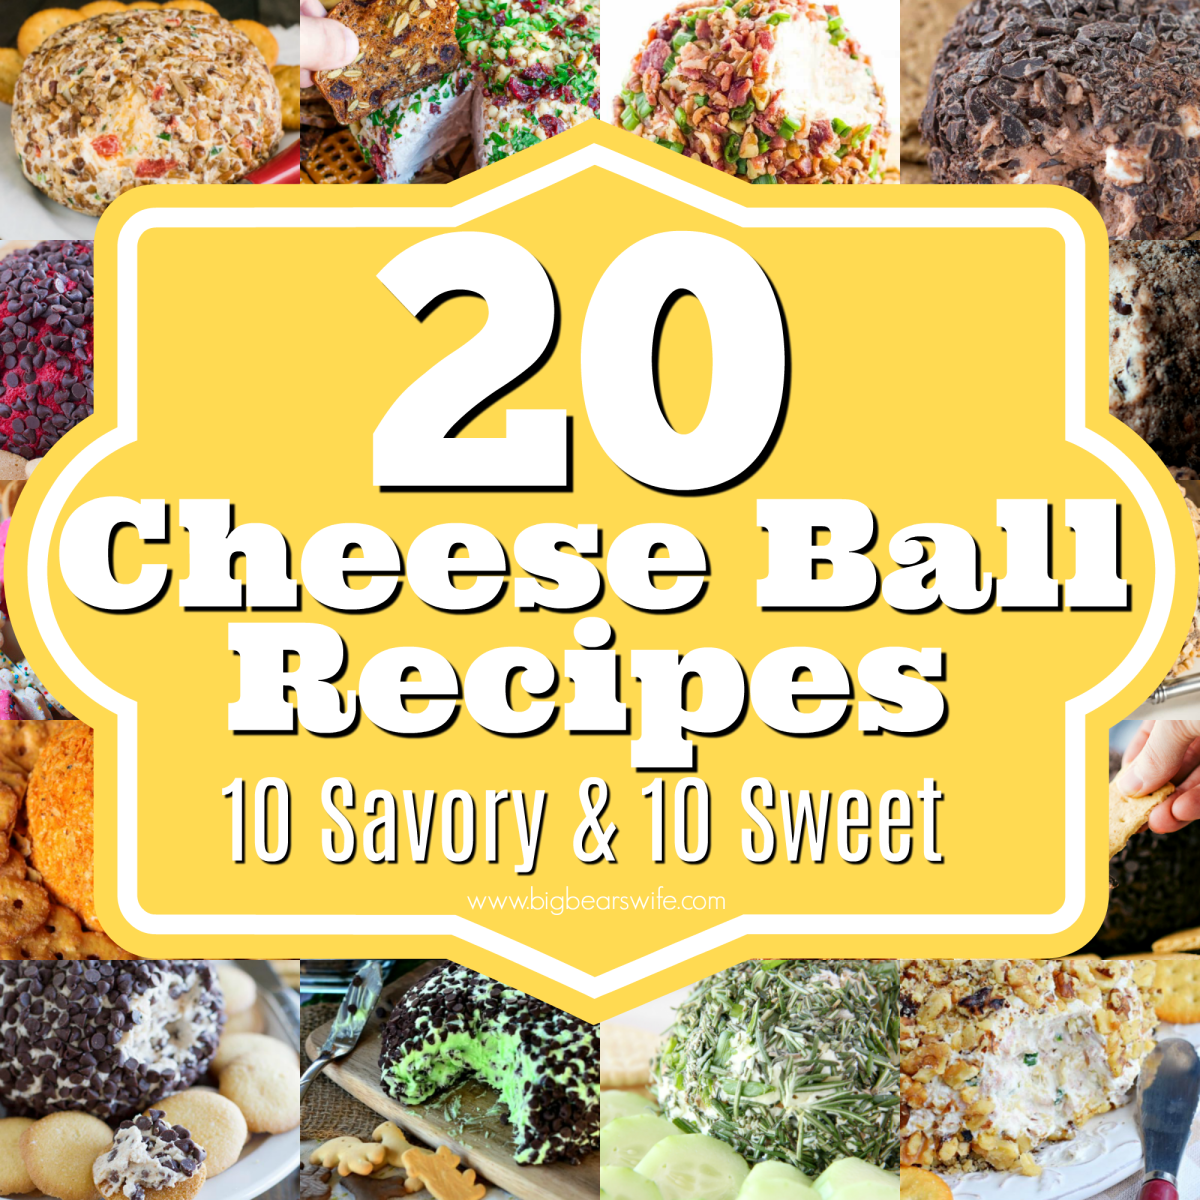 20 Cheese Ball Recipes - Cheese Balls are easy to make and they're always a hit at parties and holiday dinners! Ready for some great recipes? Here are 20 Cheese Ball Recipes - 10 Savory Cheese Ball Recipes and 10 Sweet Cheese Balls Recipes!